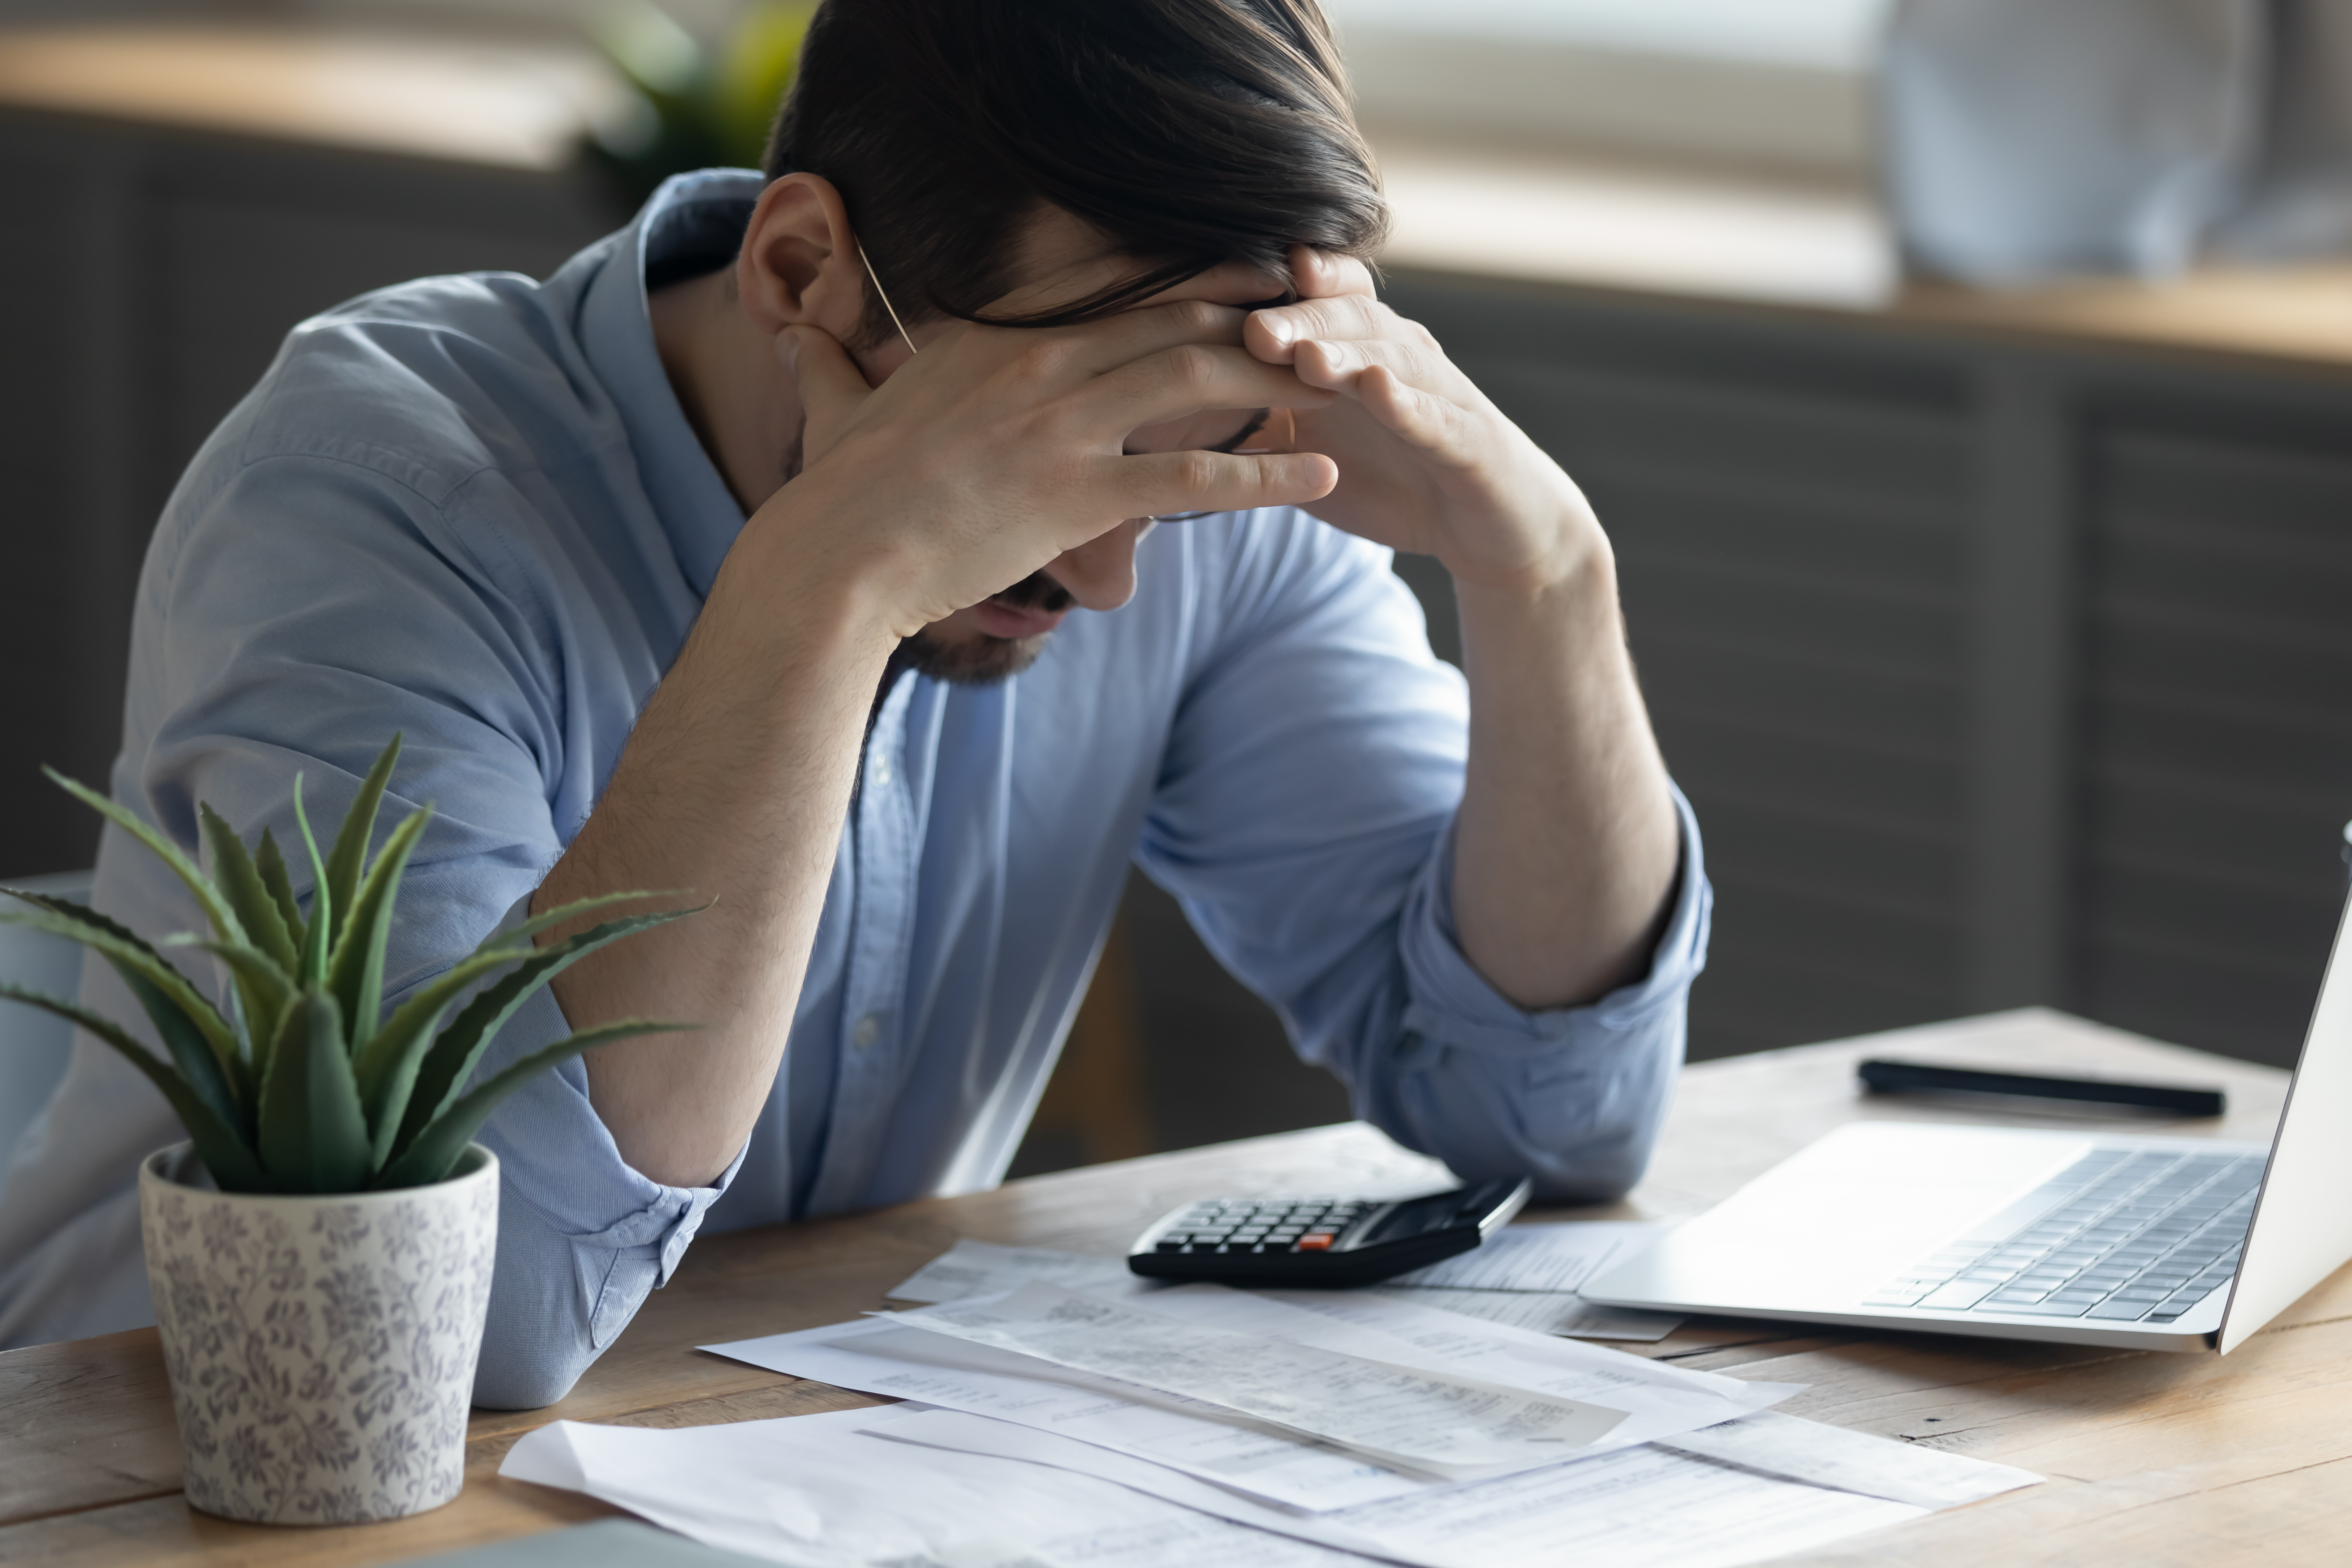 A frustrated man sitting in the office with his hands on his head | Source: Shutterstock